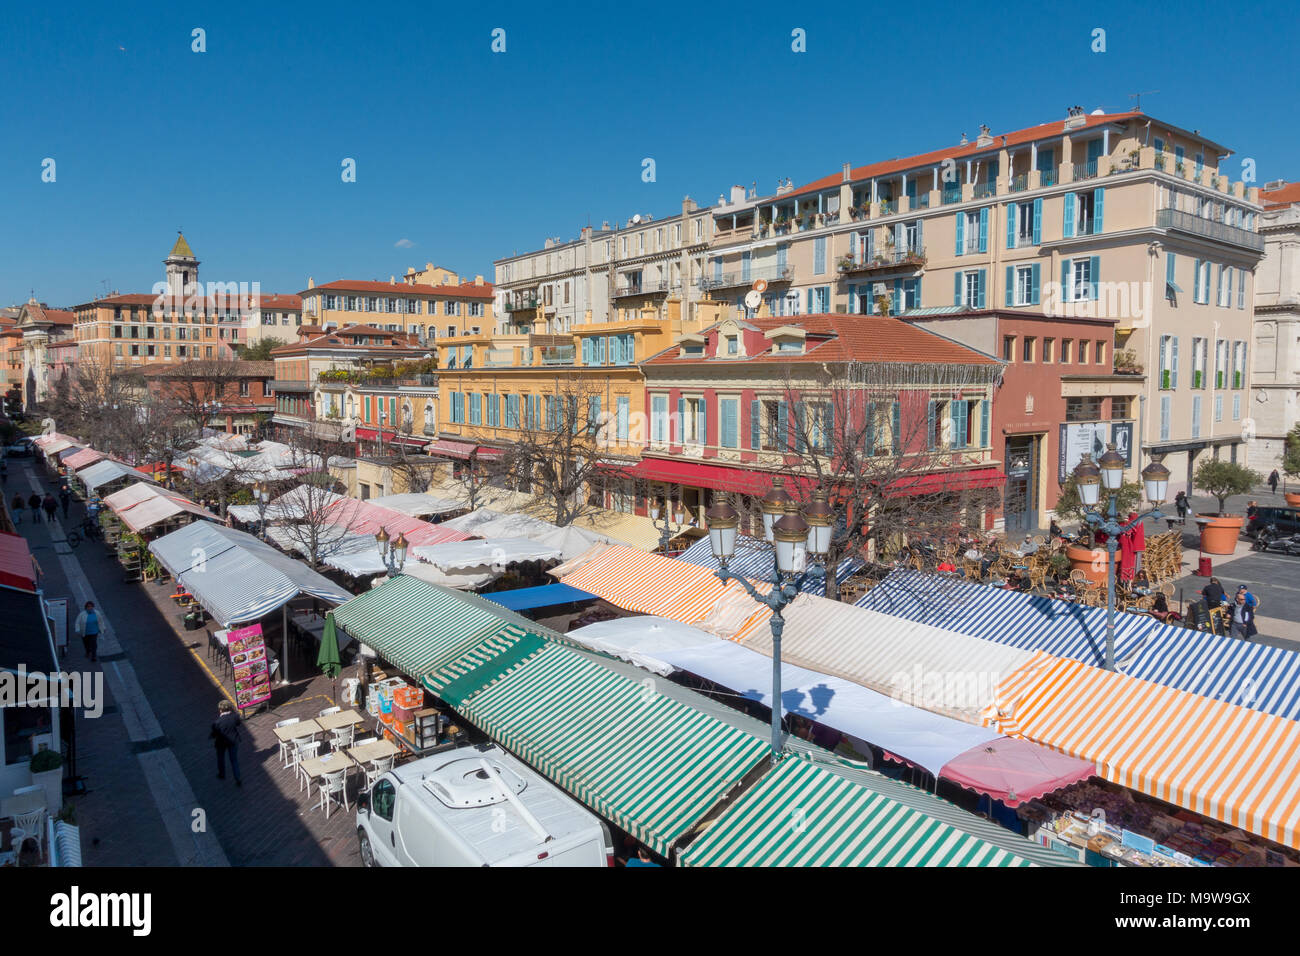 Flower market, Cours Saleya, old town of Nice, France Stock Photo